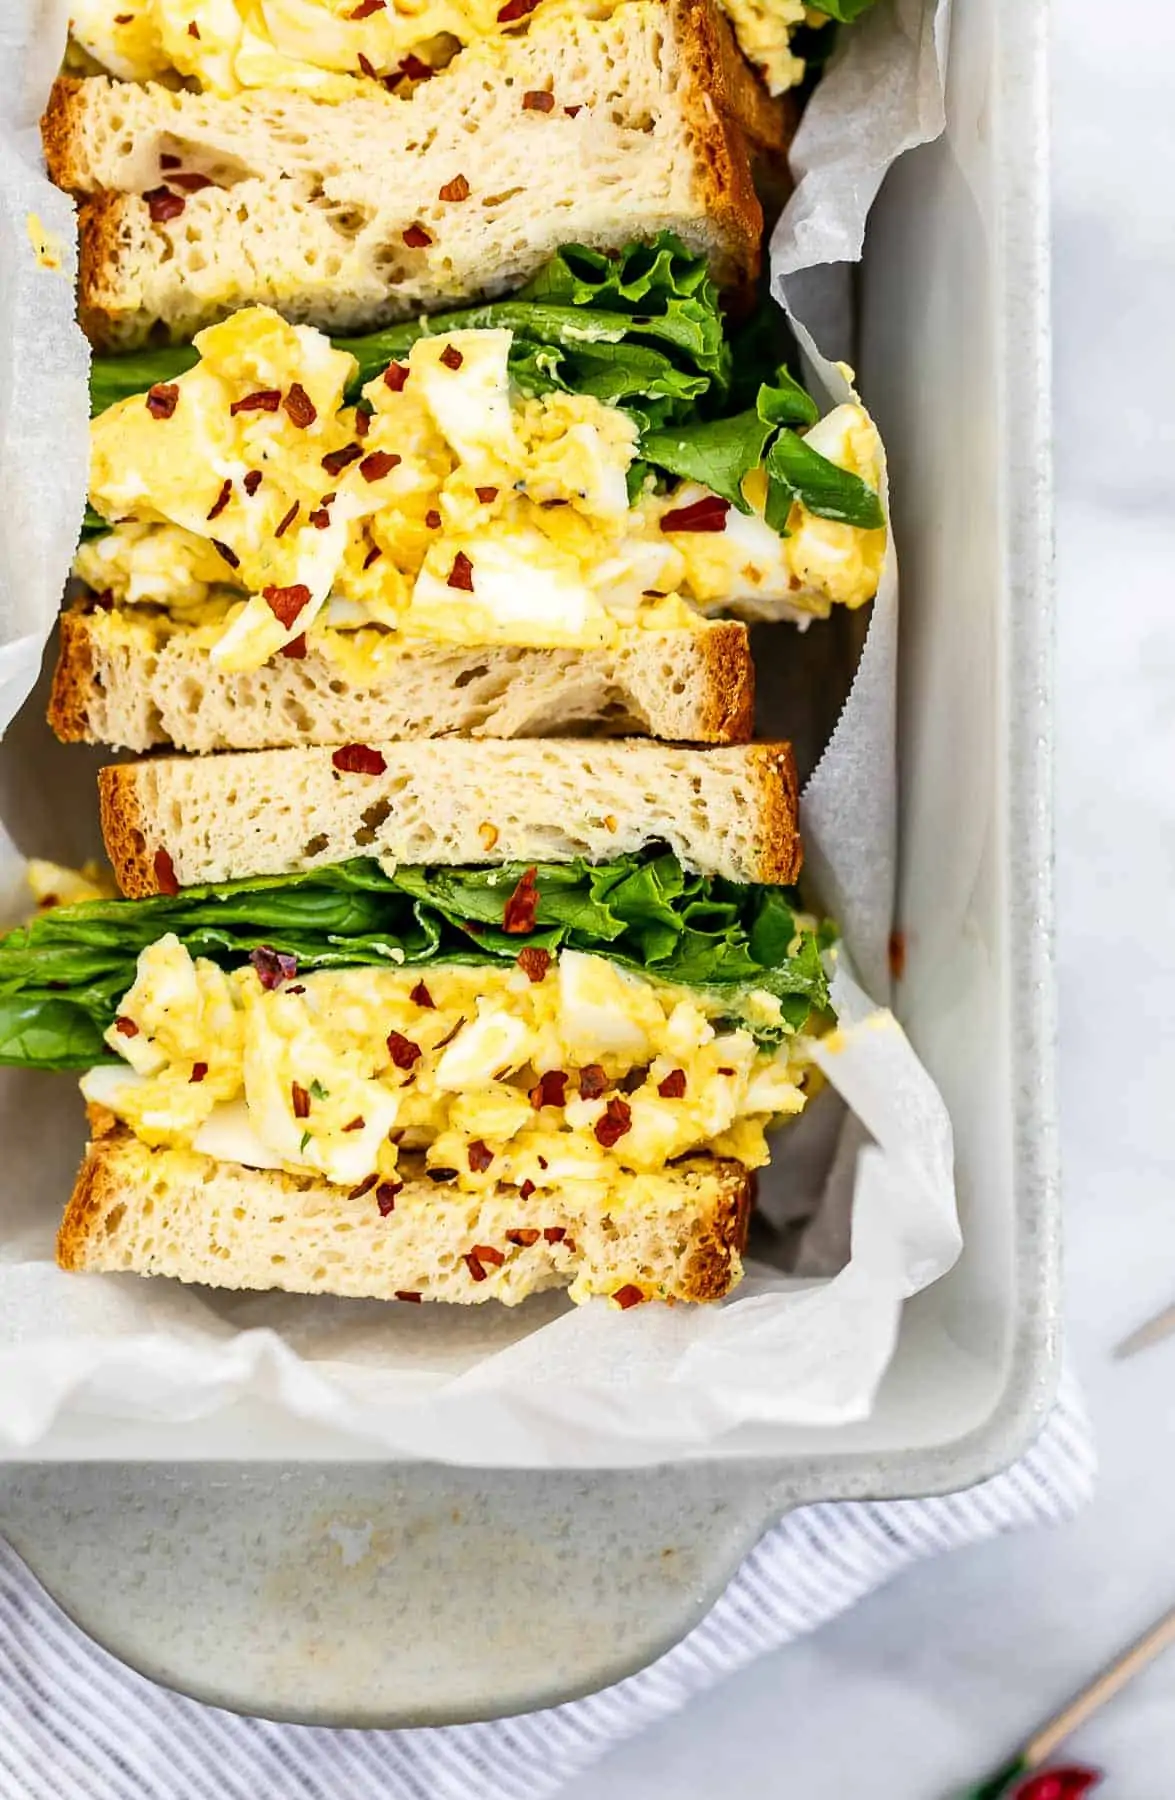 Up close image of the egg salad sandwich with red pepper flakes. 